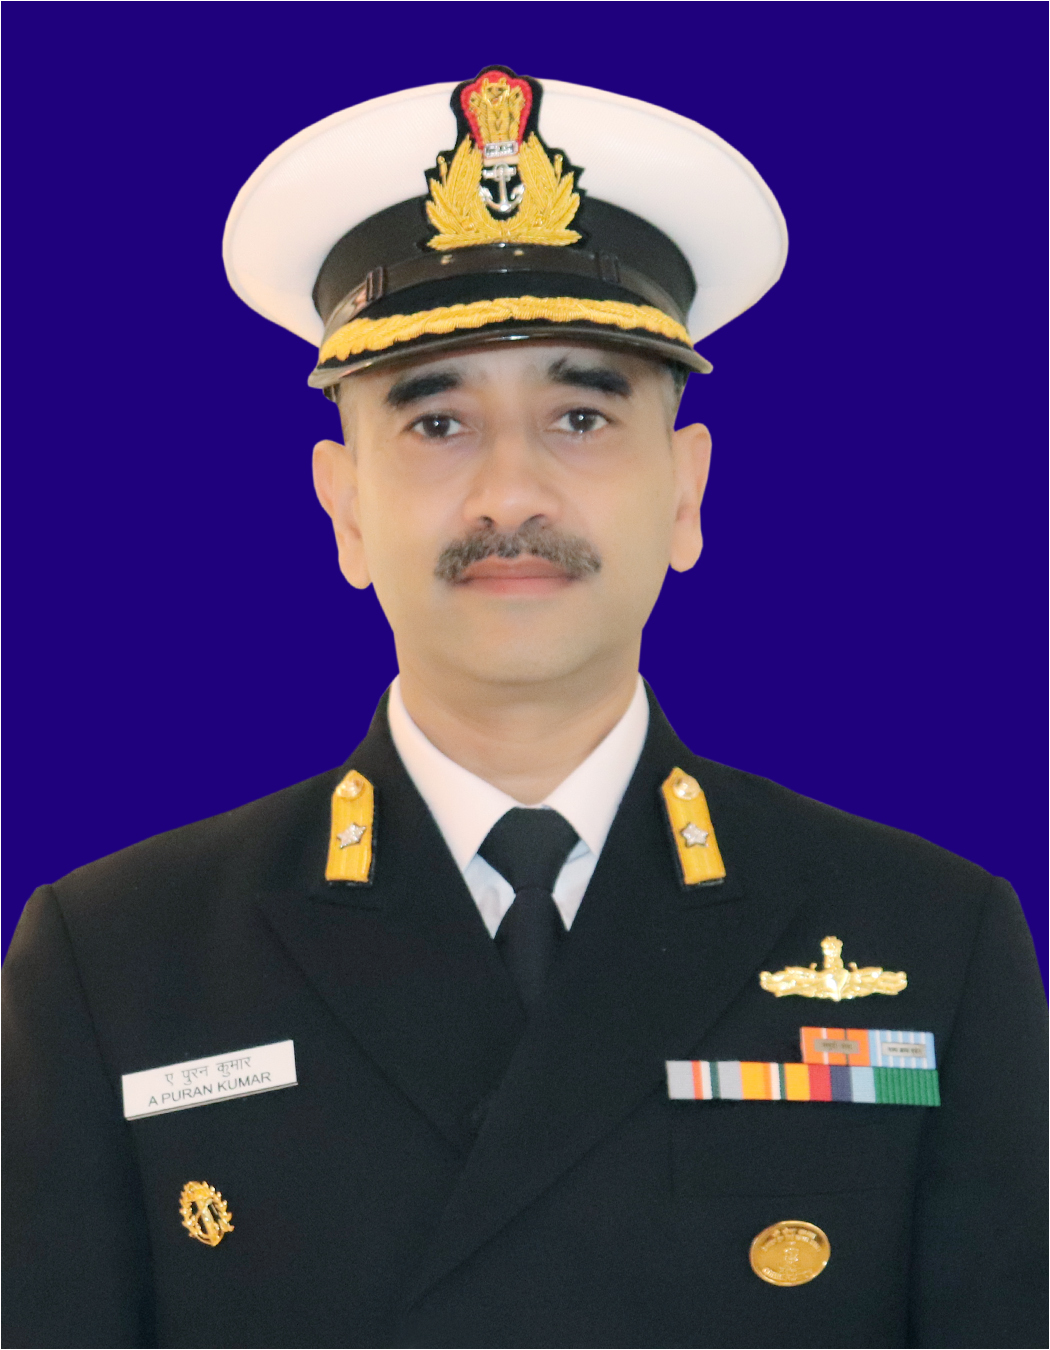 Arihant Indian Air Force and Indian Navy Guide for General English Useful  for Navy SSR | NMR | MR | Artificer Apprentice Exam : Deepali: Amazon.in:  Books